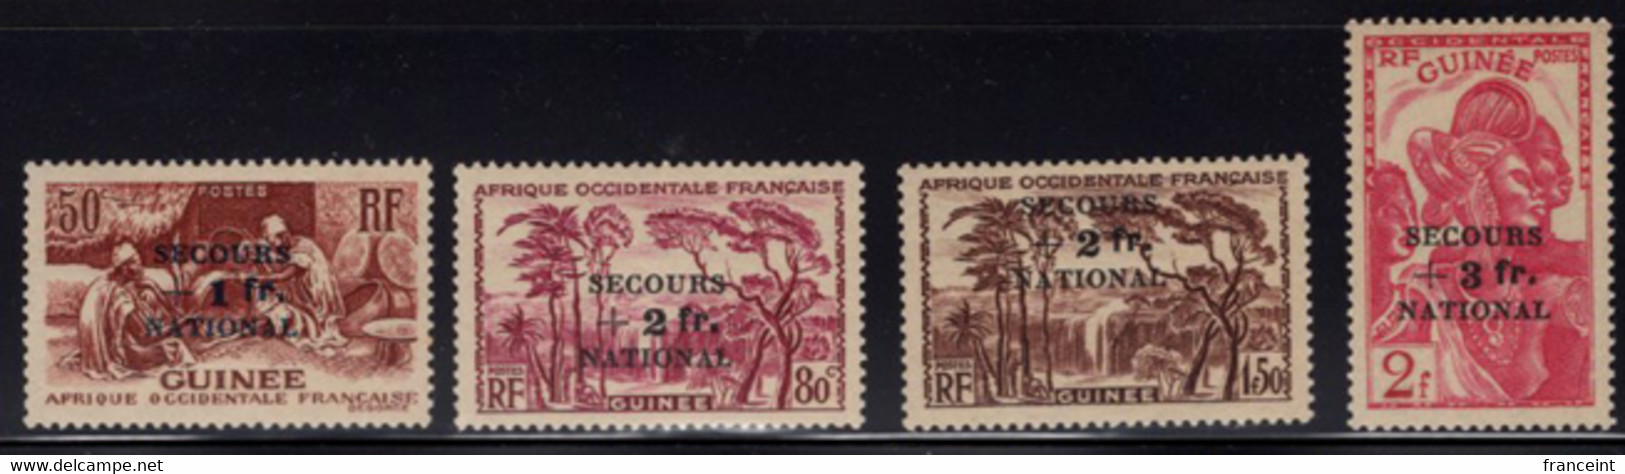 French Colonies (1941) Secours National GUINEA. Complete Set MNH. Scott Nos B8-11. - 1941 Secours National